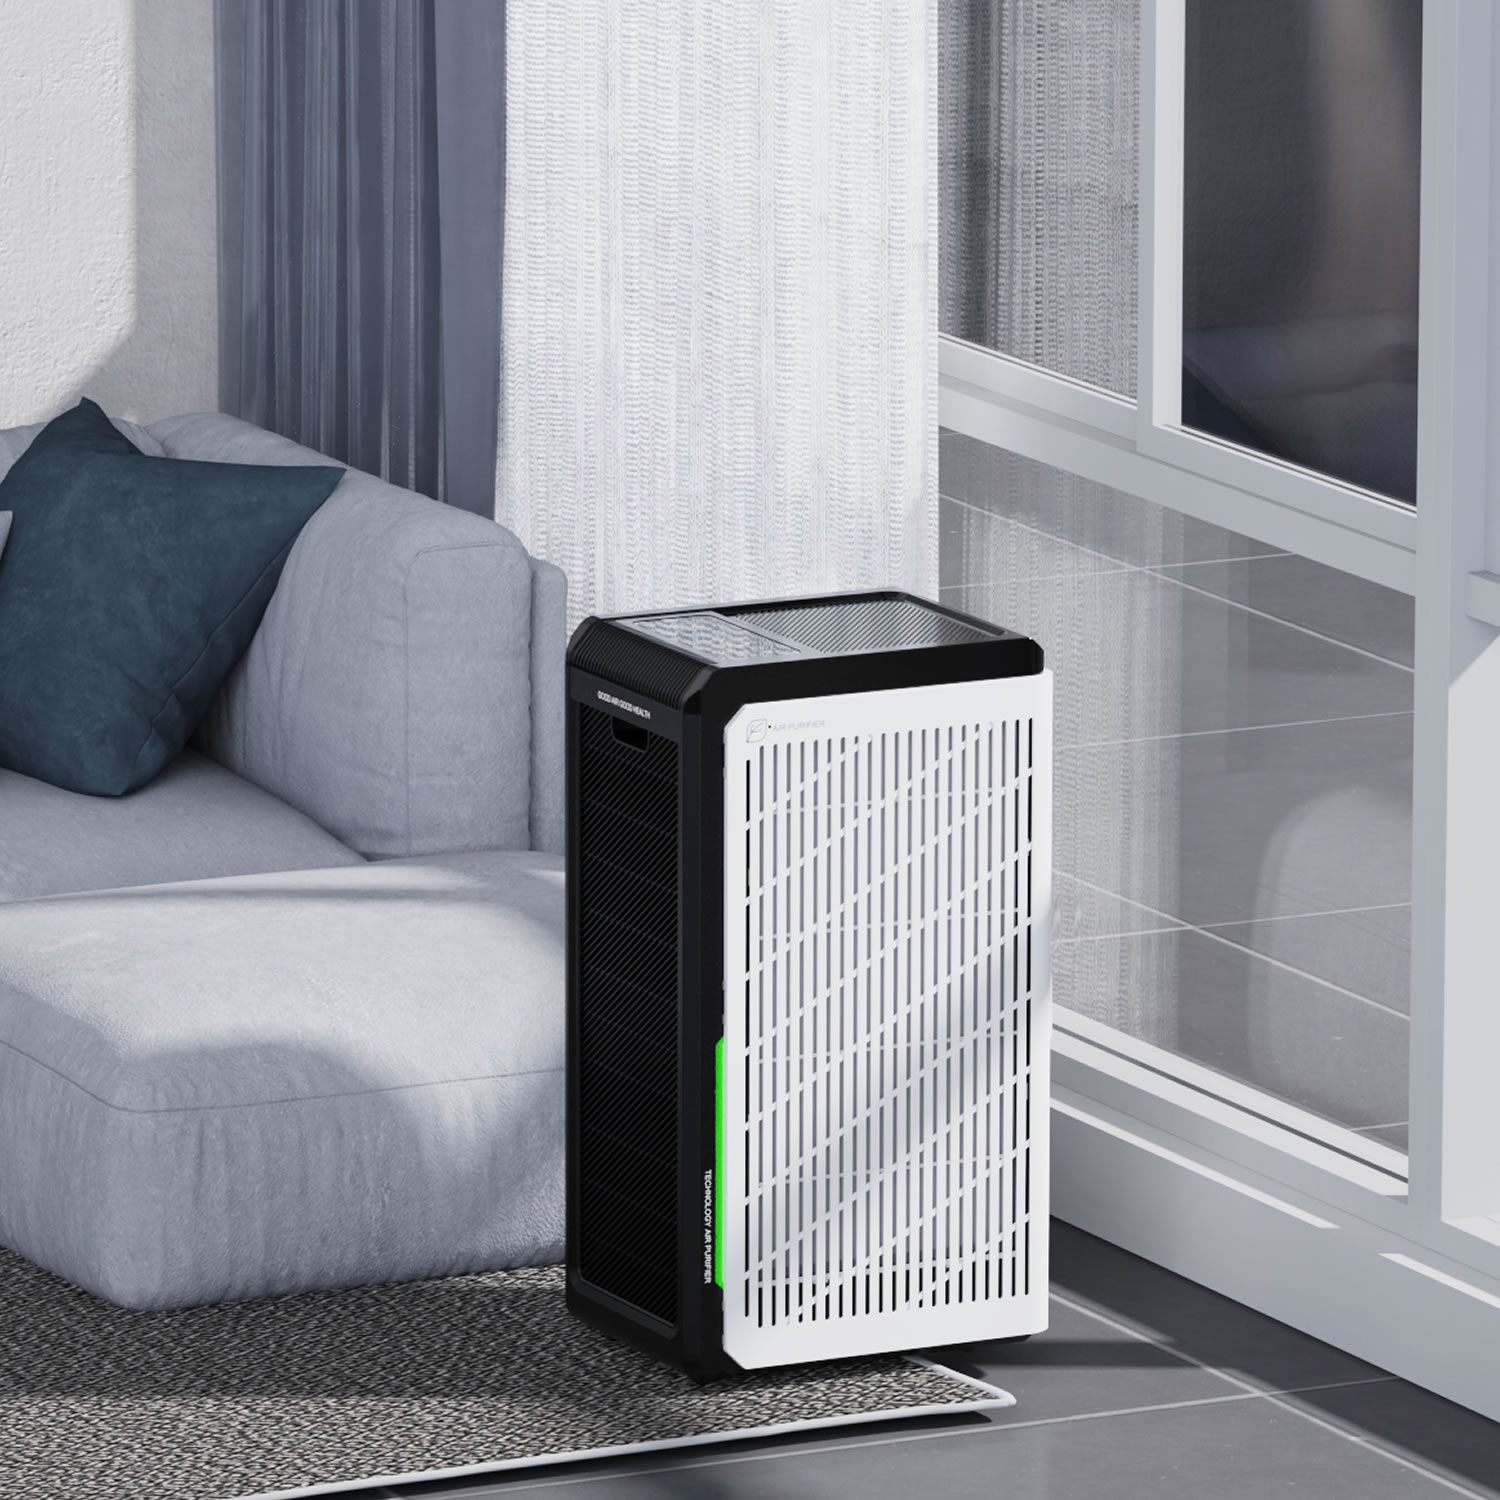 New arrival medical grade air purifier products